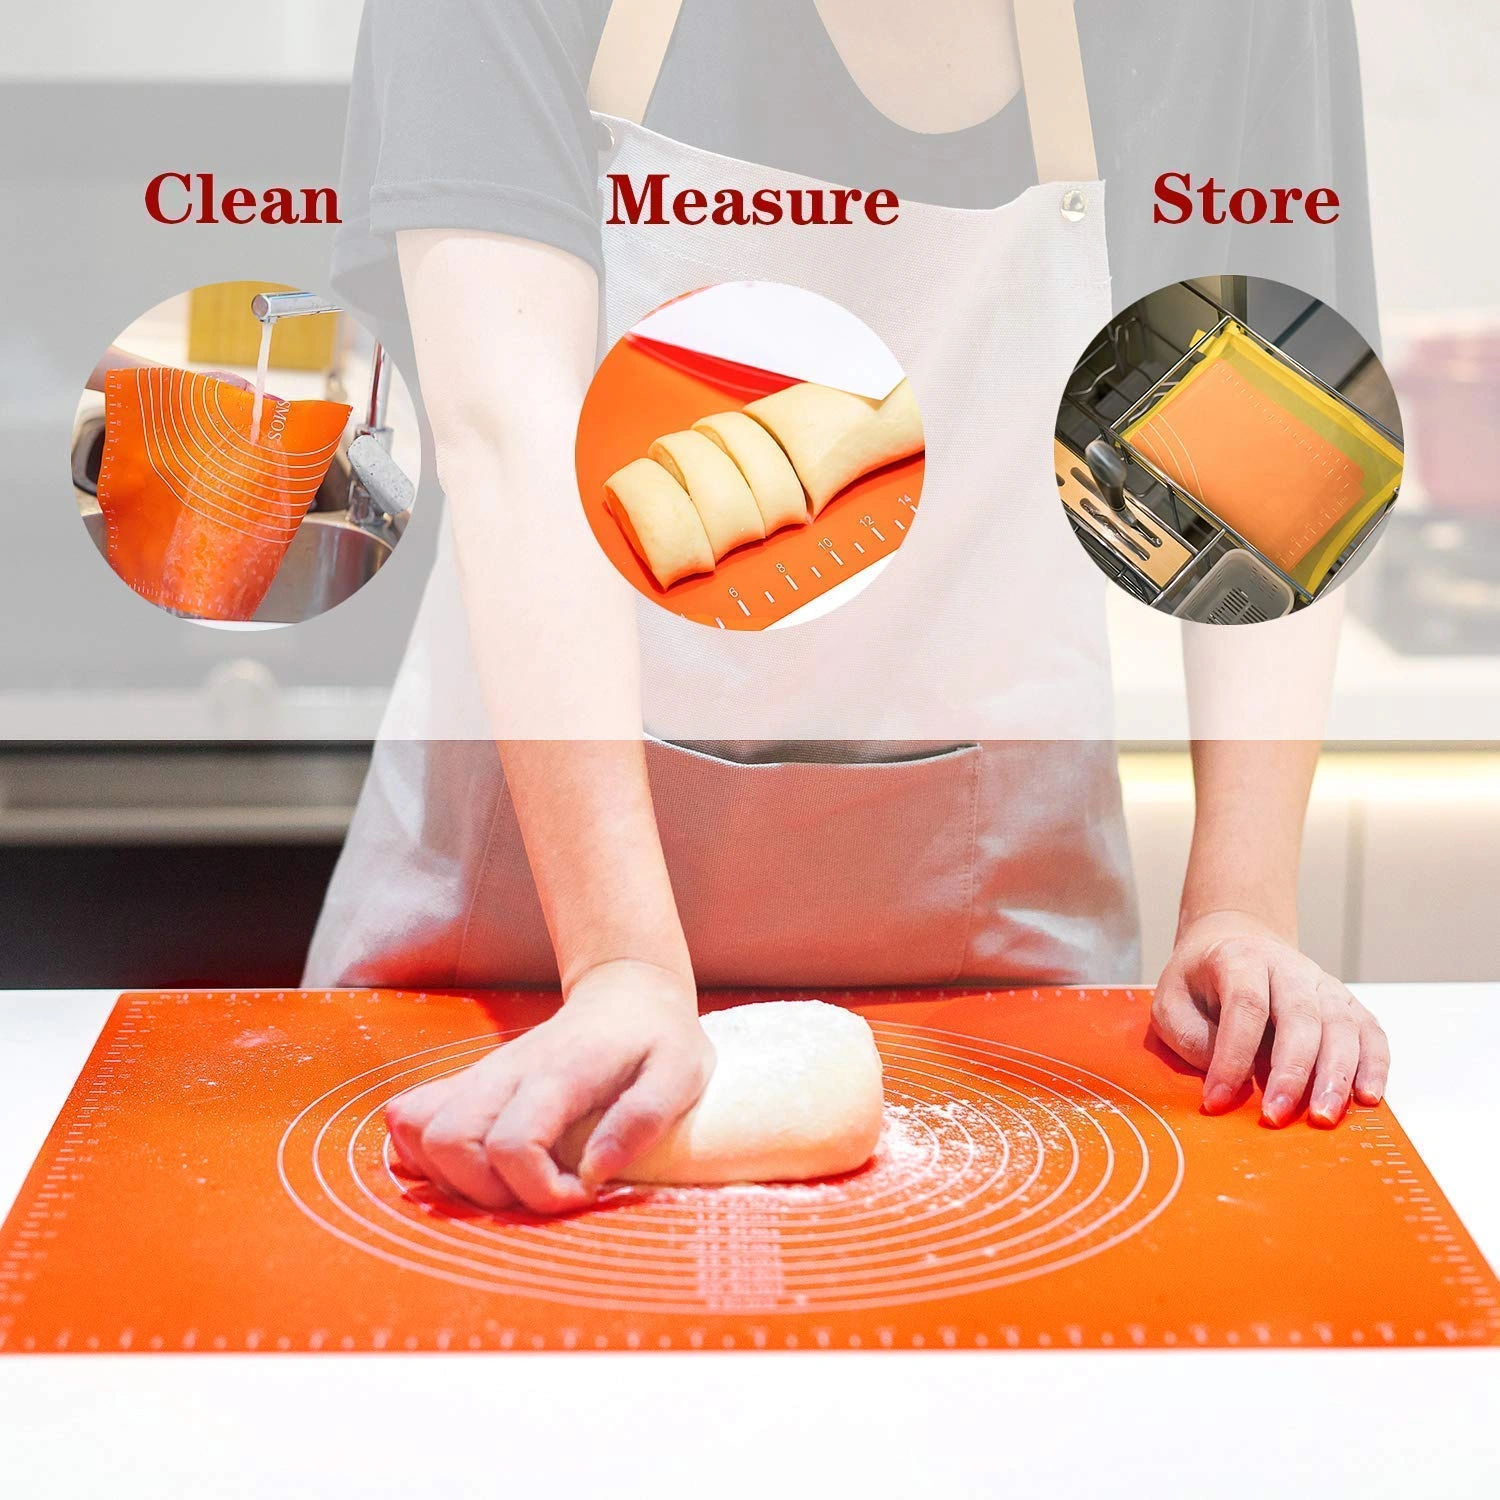 RD MALL Silicone Non-Stick Kneading Dough Mat for Pastry Rolling, Kneading Fondant, Baking Pad, Table Sheet, Non Slip Cooking Mat, Bake Pizza Cake - Random Color-1